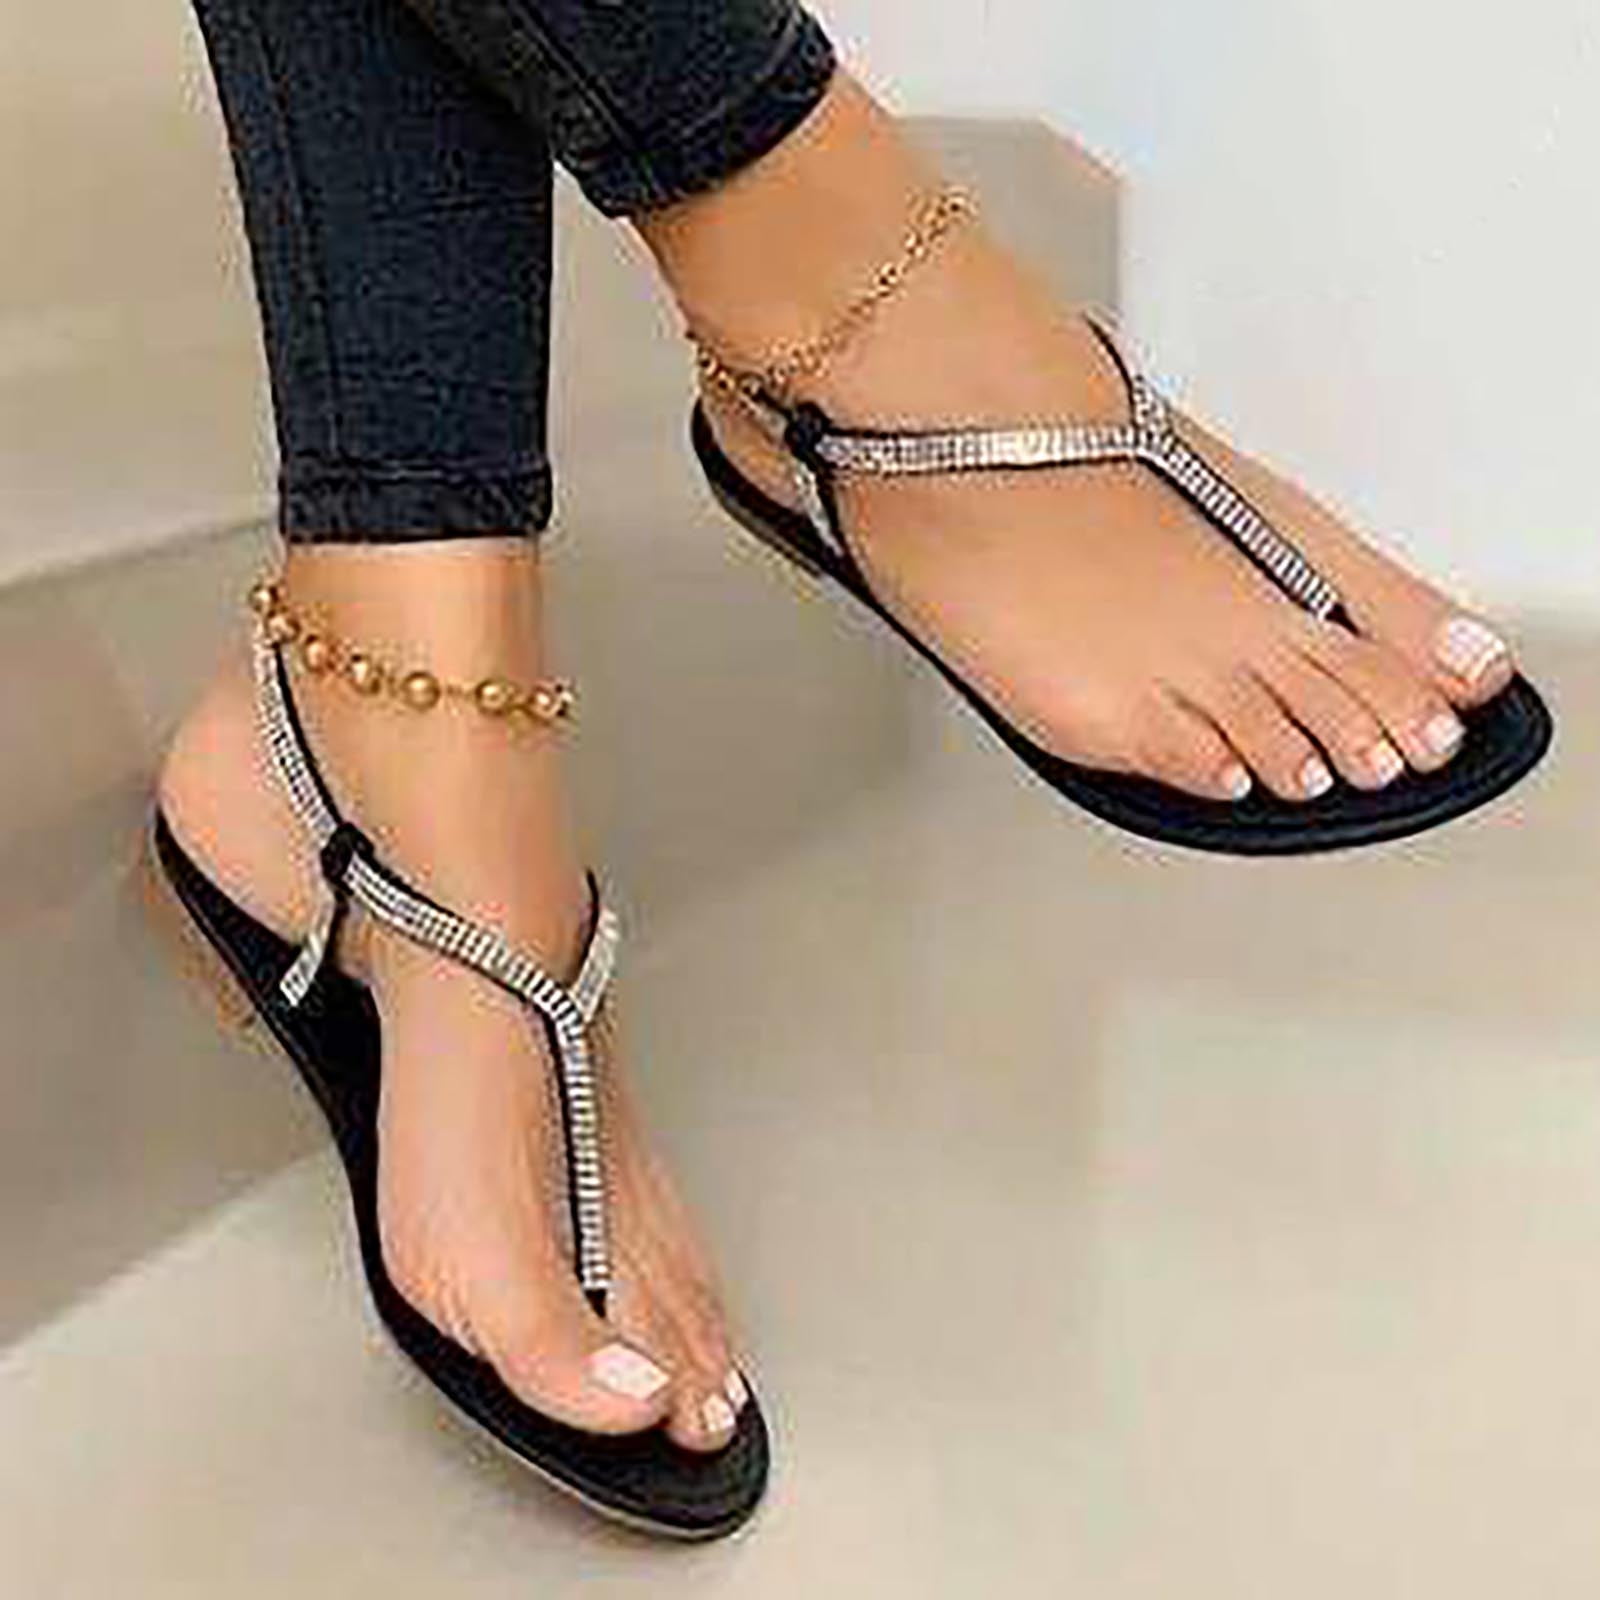 Women's Athena-755 Thong-Style Metallic Accent Sandals